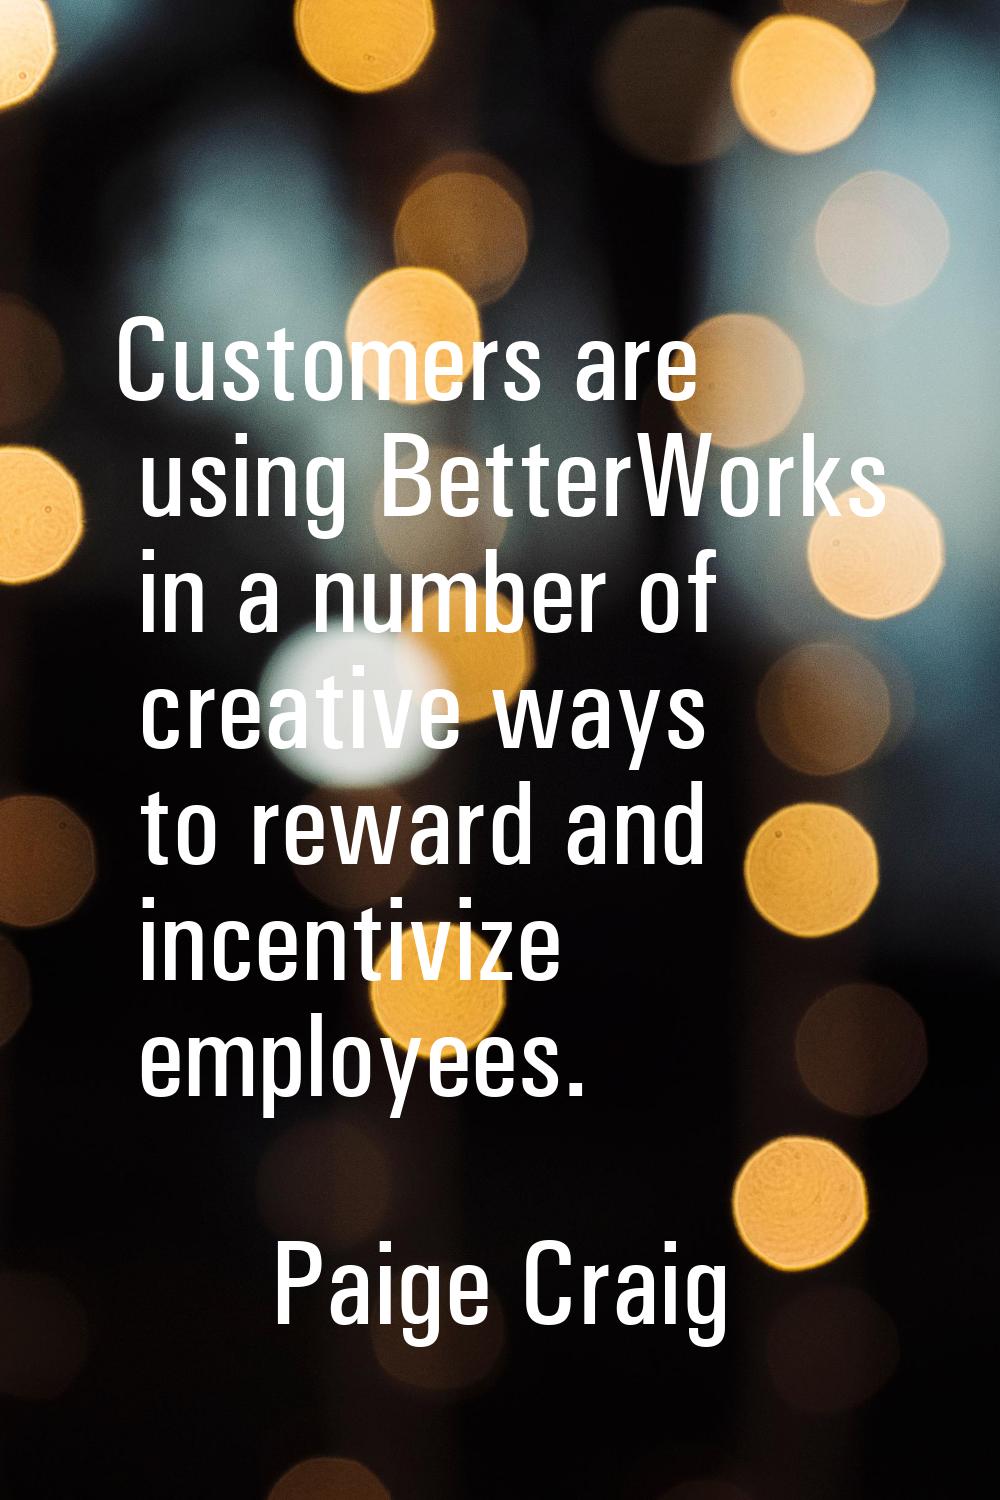 Customers are using BetterWorks in a number of creative ways to reward and incentivize employees.